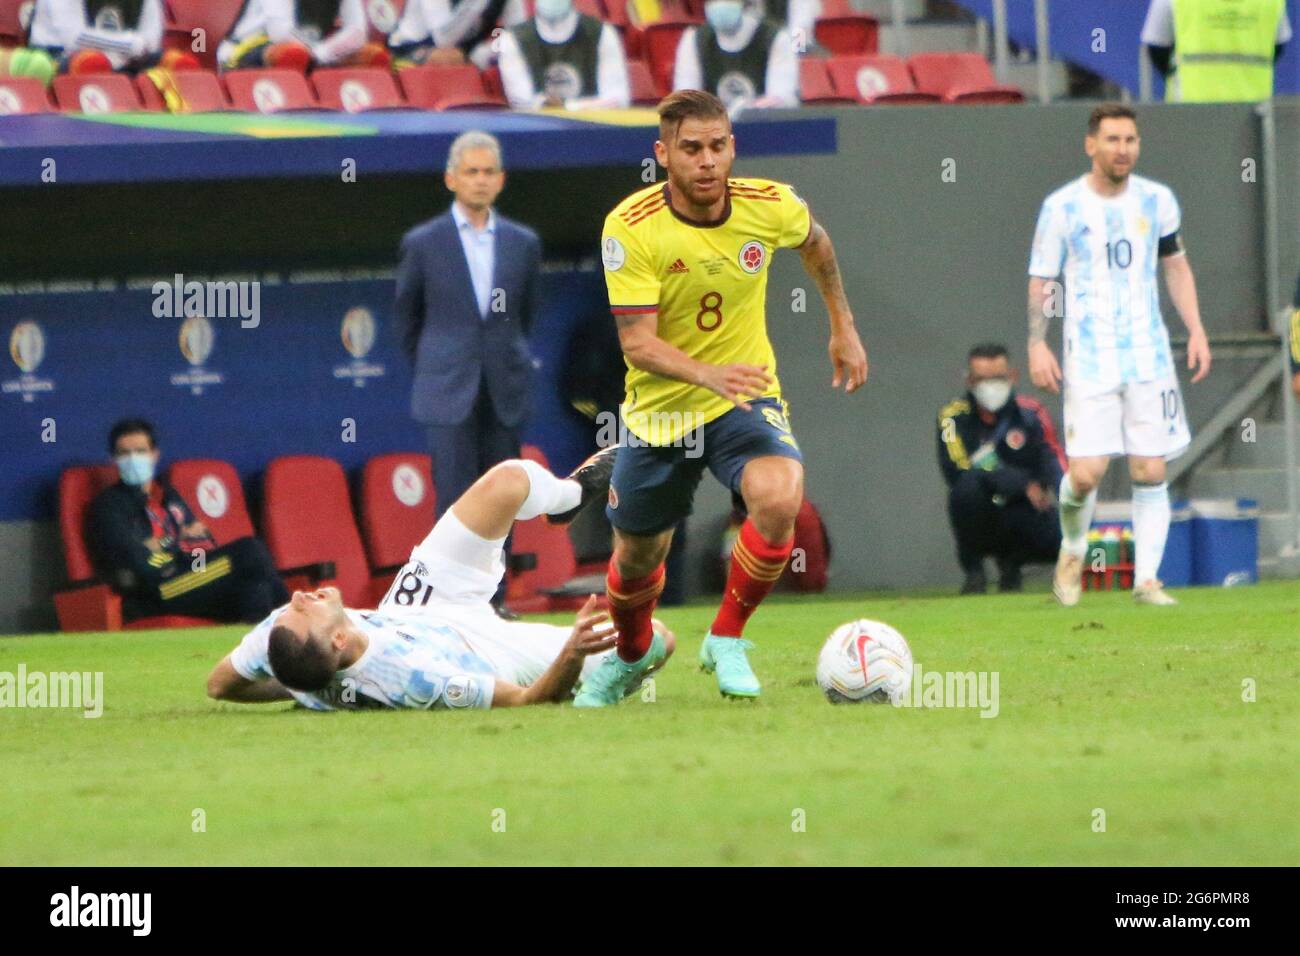 Brasilia, Brazil. 6th July, 2021.G Cuellar of Colombia during the Copa America 2021, semi-final football match between Argentina and Colombia on July 6, 2021 at Estádio Nacional Mané Garrincha in Brasilia, Brazil. Photo by Laurent Lairys/ABACAPRESS.COM Stock Photo